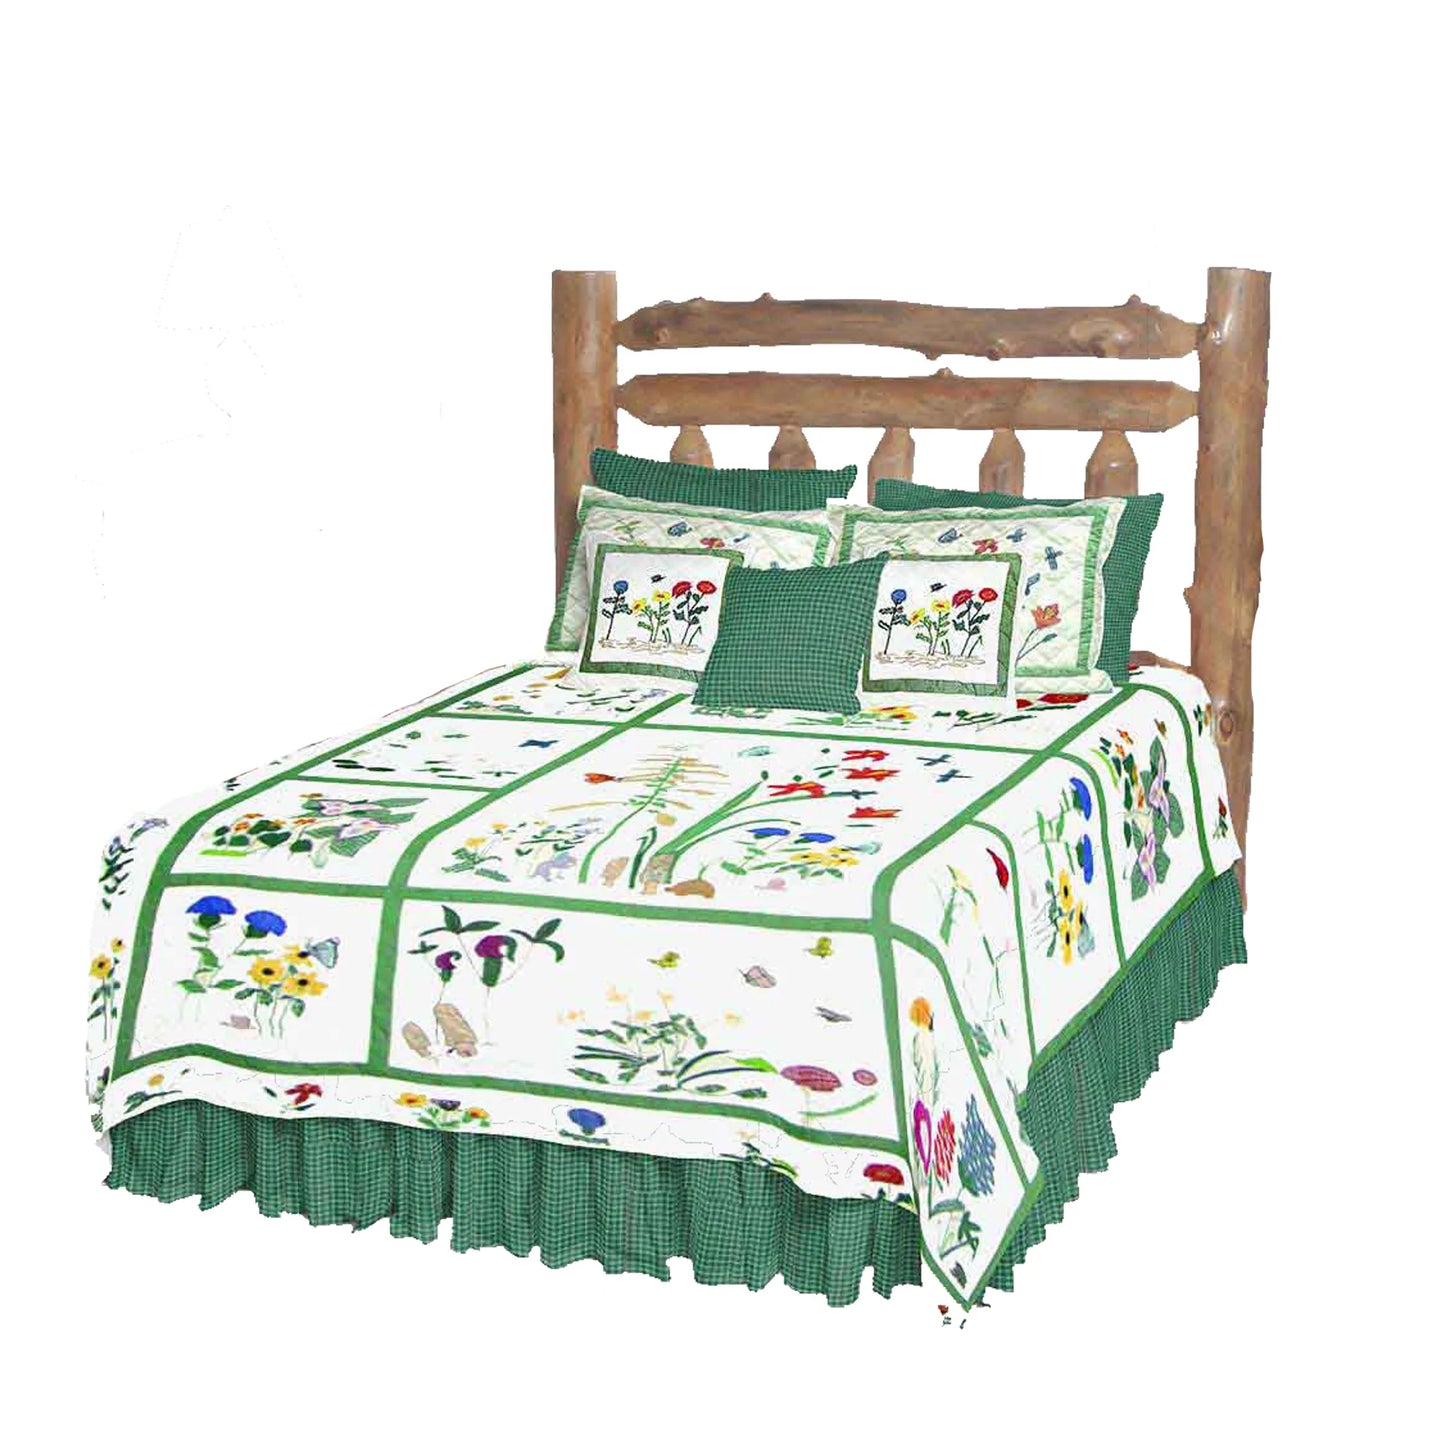 Wildflowers meadow Quilt, Hand cut and Appliqued cotton fabric motifs.